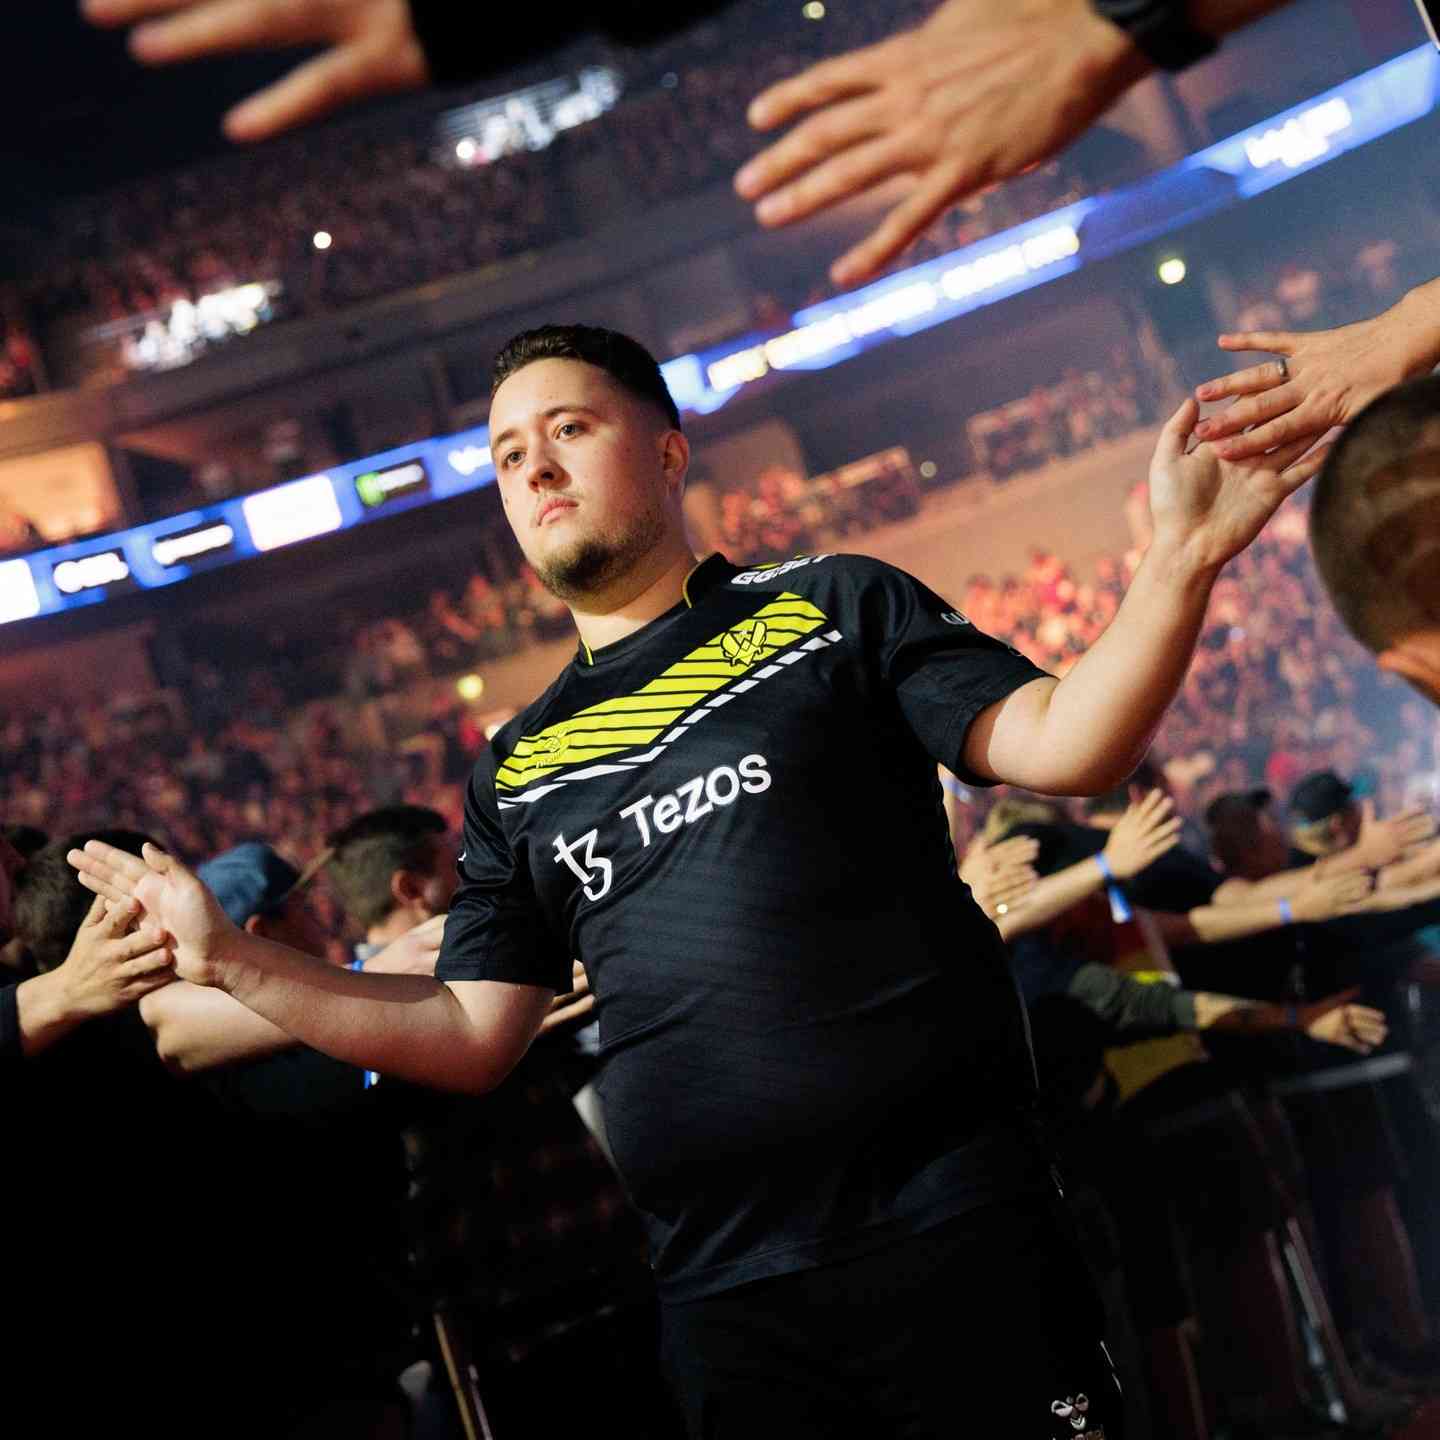 ZywOo entering the Arena with crowd support (Image Credits: Instagram/cs_zywoo)